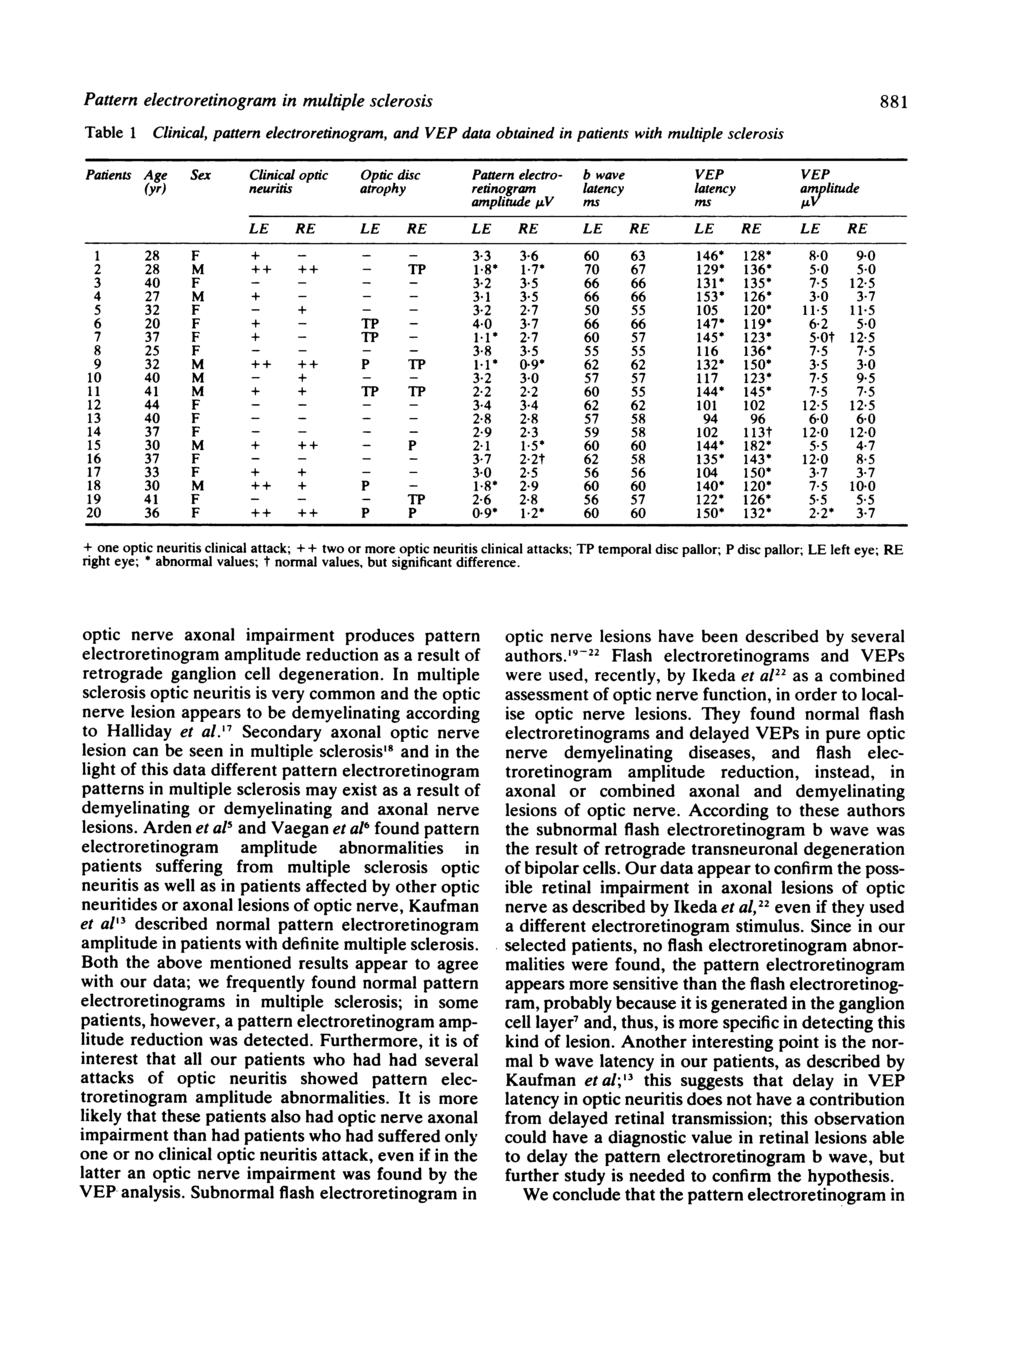 Pattern electroretinogram in multiple sclerosis Table 1 Clinical, pattern electroretinogram, and VEP data obtained in patients with multiple sclerosis Patients Age Sex Clinical optic Optic disc